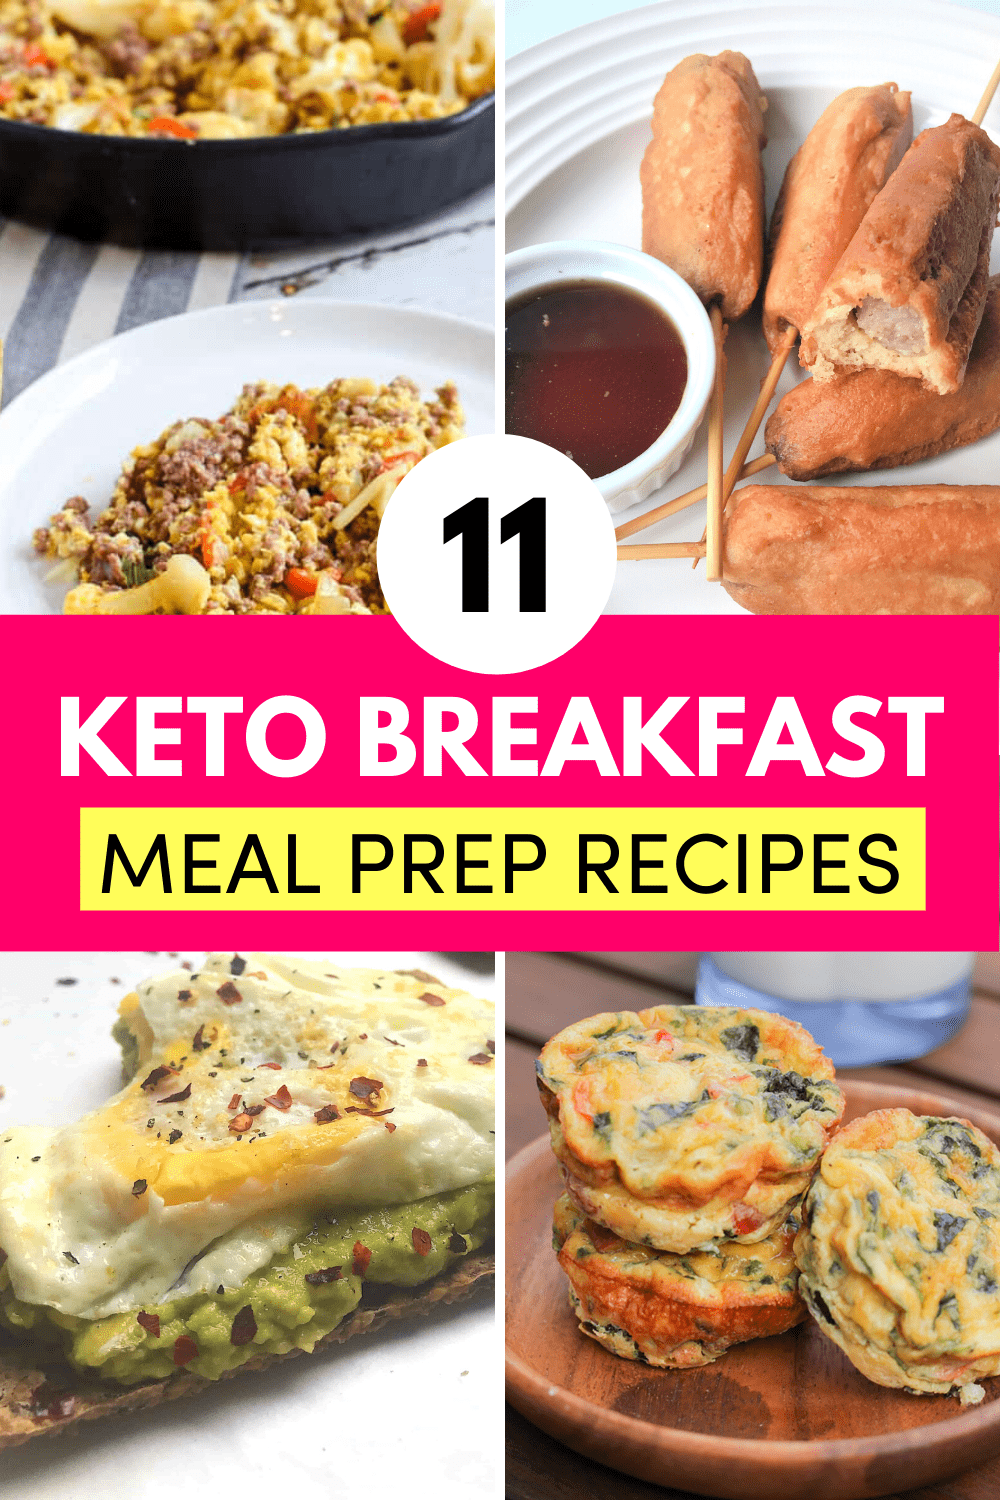 Keto Breakfast Meal Prep Ideas - Easy Low Carb Ketogenic Diet Recipes